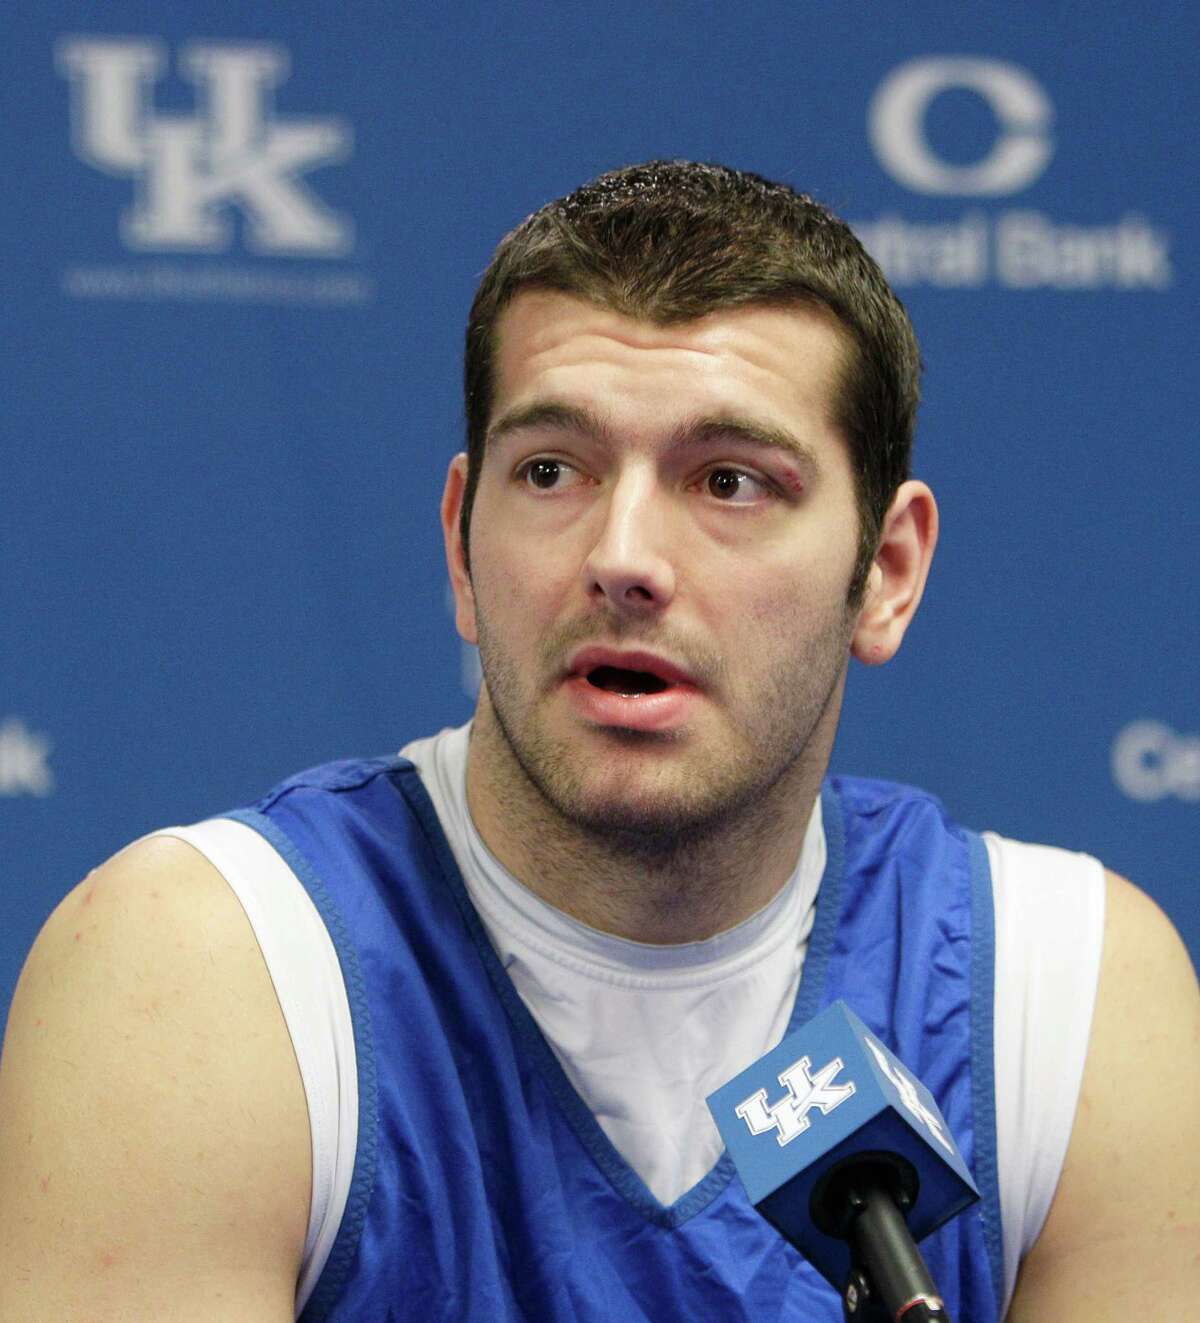 Kentucky's Josh Harrellson answers a question during a news conference in Lexington, Ky., Tuesday, March 29, 2011. Harrellson's teammates call him Jorts. Opposing coaches have called him everything from "mother hen" to the most underrated big man in the country. (AP Photo/Ed Reinke)